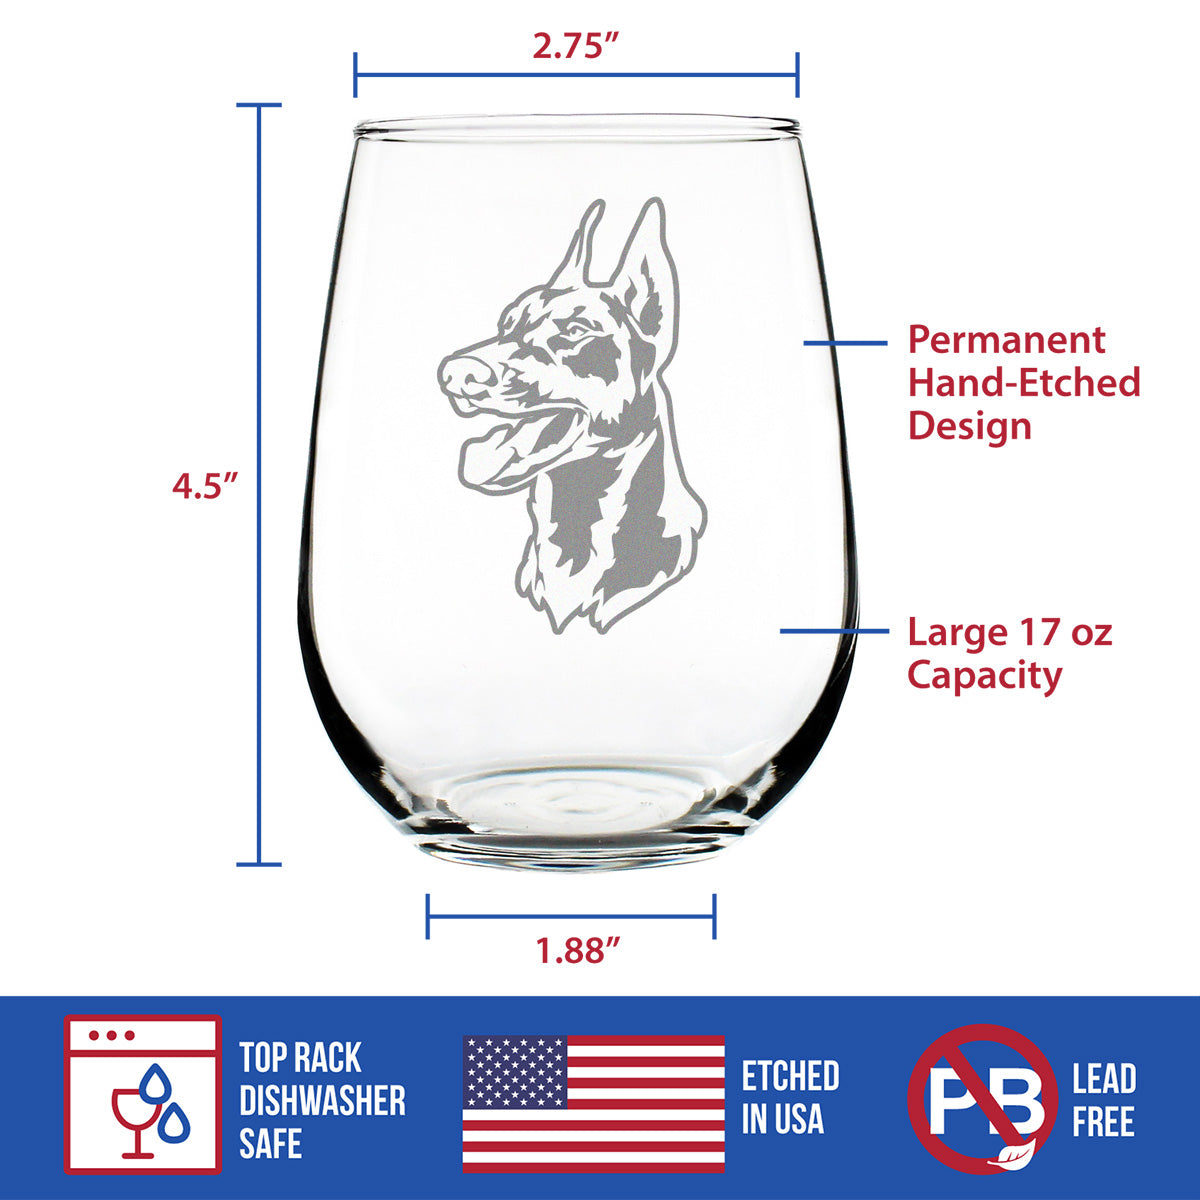 Doberman Face Stemless Wine Glass - Cute Dog Themed Decor and Gifts for Moms &amp; Dads of Pinscher Dobermans - Large 17 Oz